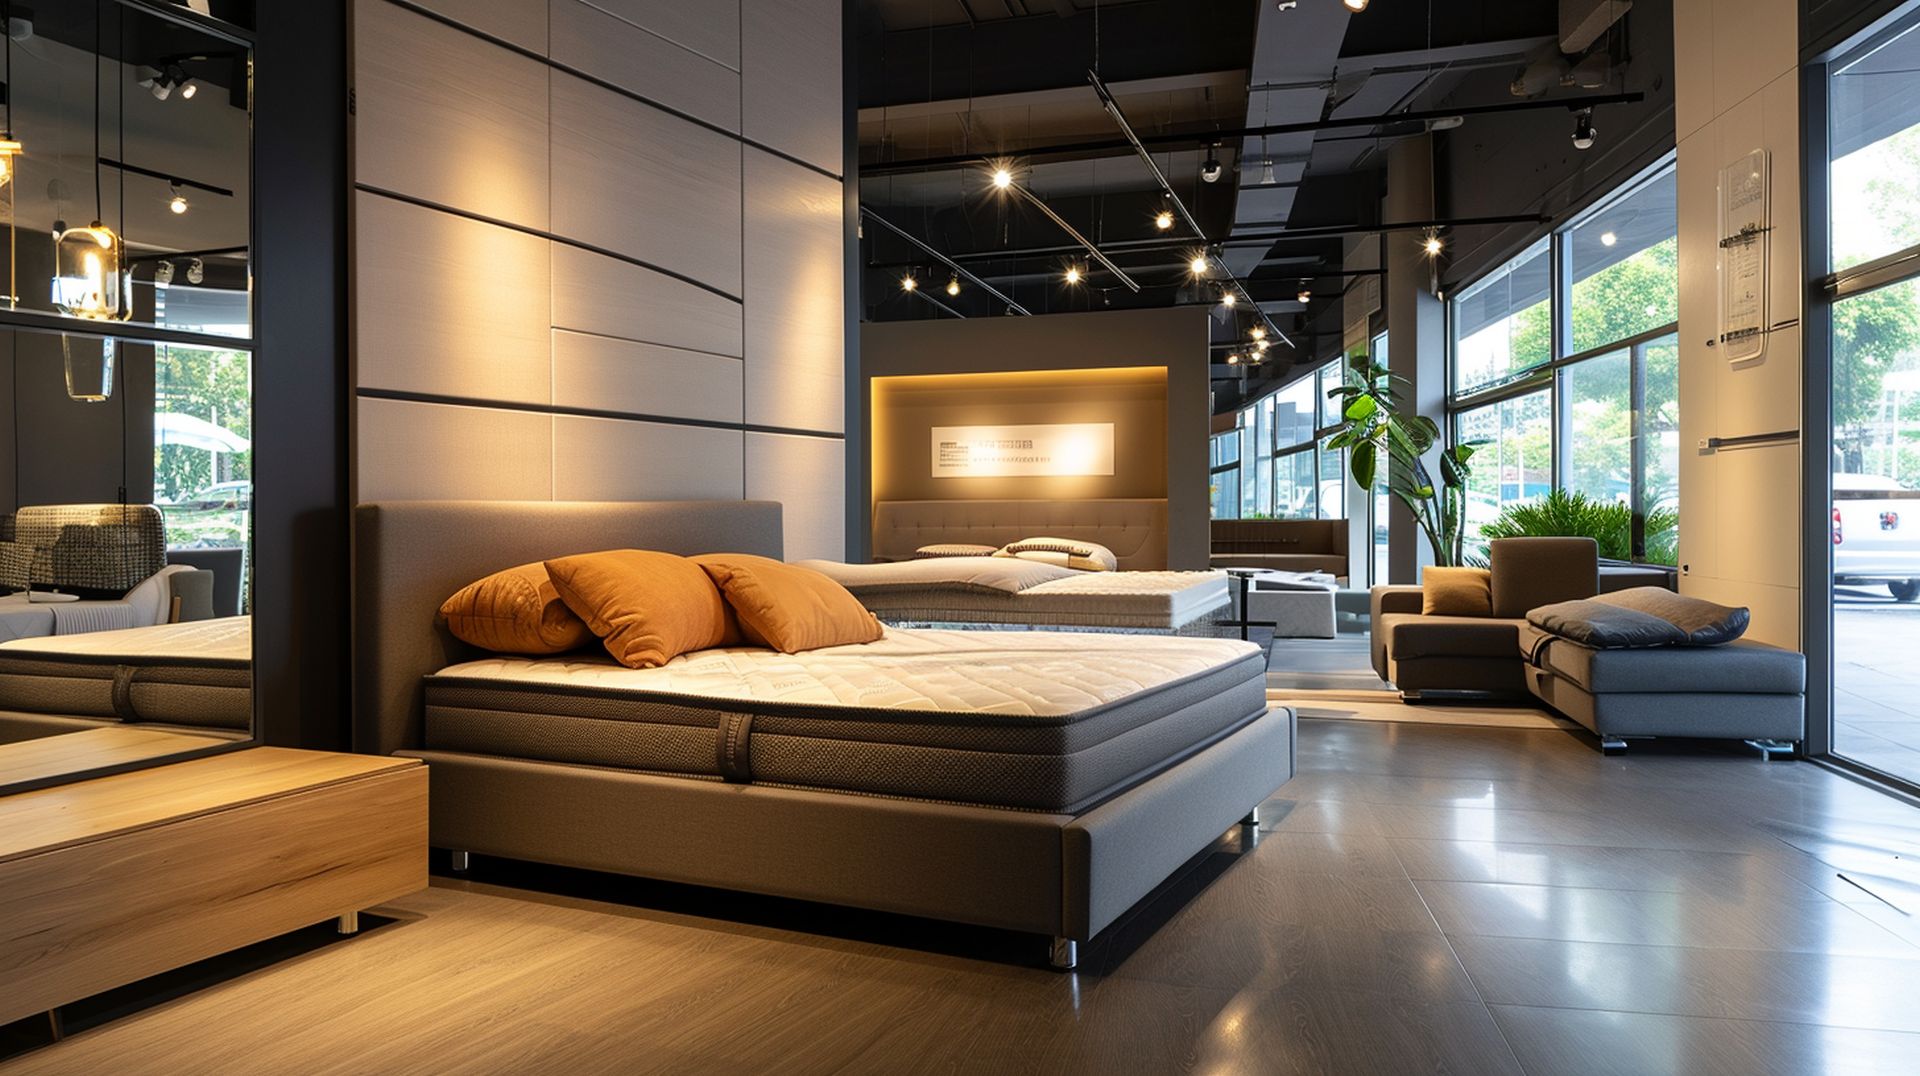 If you're looking for a new bed, mattress stores in Canyon Country offer the best customer and delivery service, financing, and warranties in California